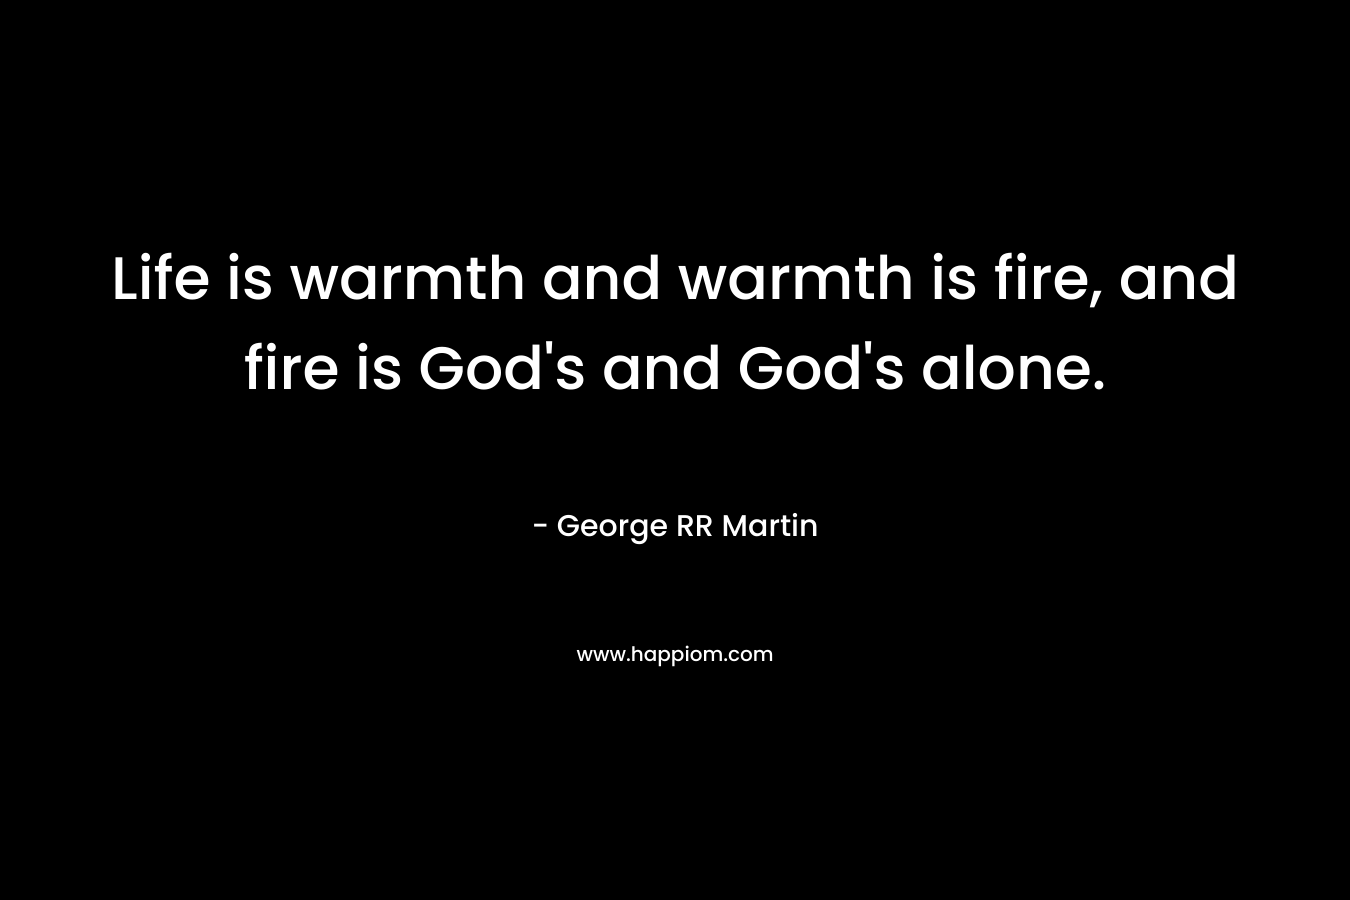 Life is warmth and warmth is fire, and fire is God’s and God’s alone. – George RR Martin